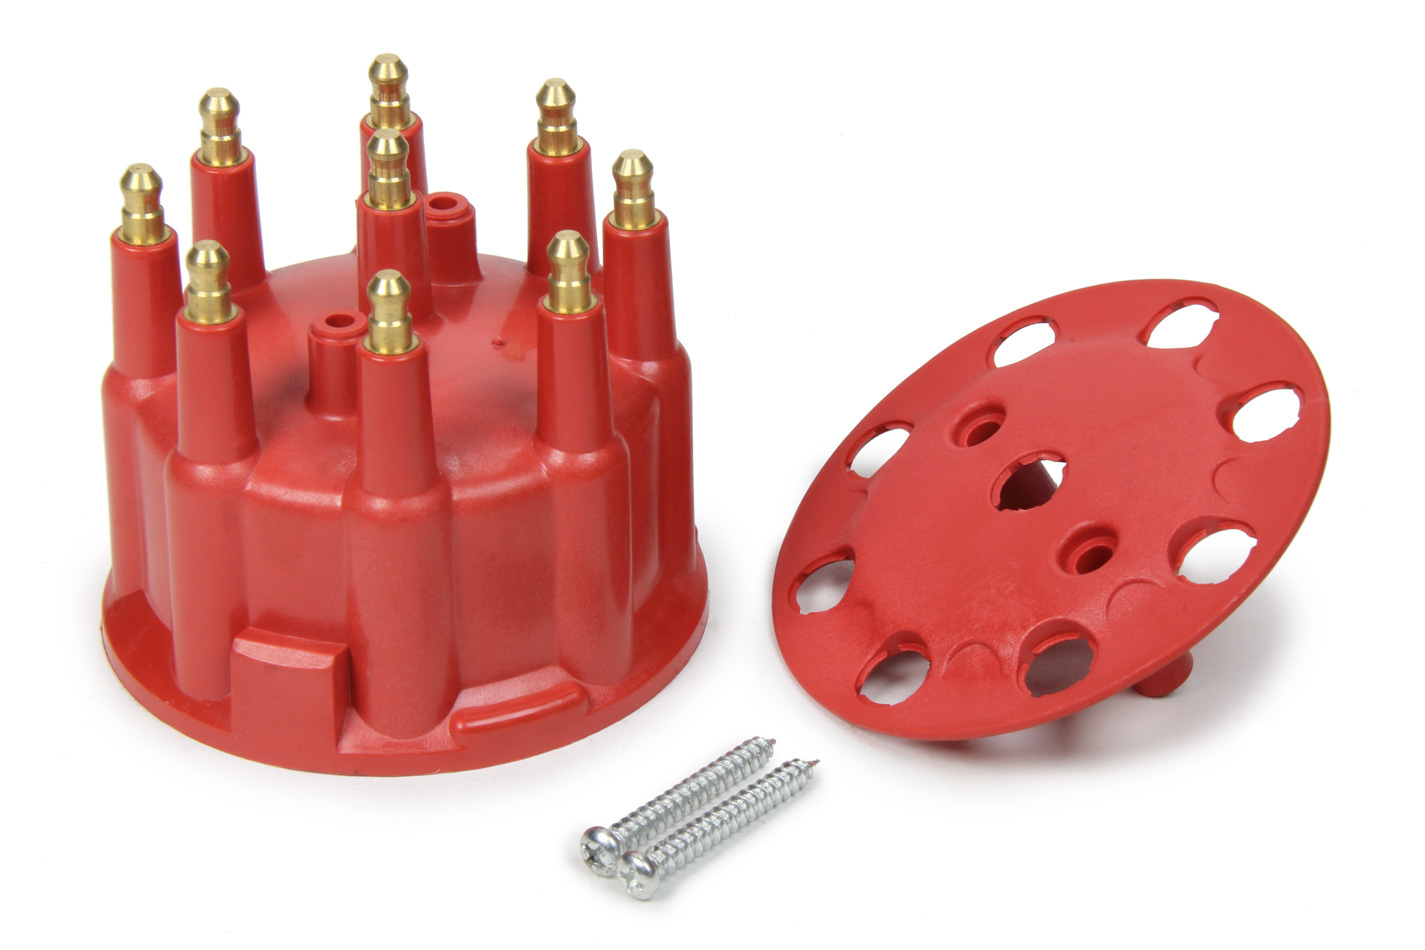 Racing Power Company R3824 Distributor Cap, HEI Style Terminals, Brass Terminals, Clamp Down, Red, Non-Vented, Small Diameter Distributor, Chevy V8, Each